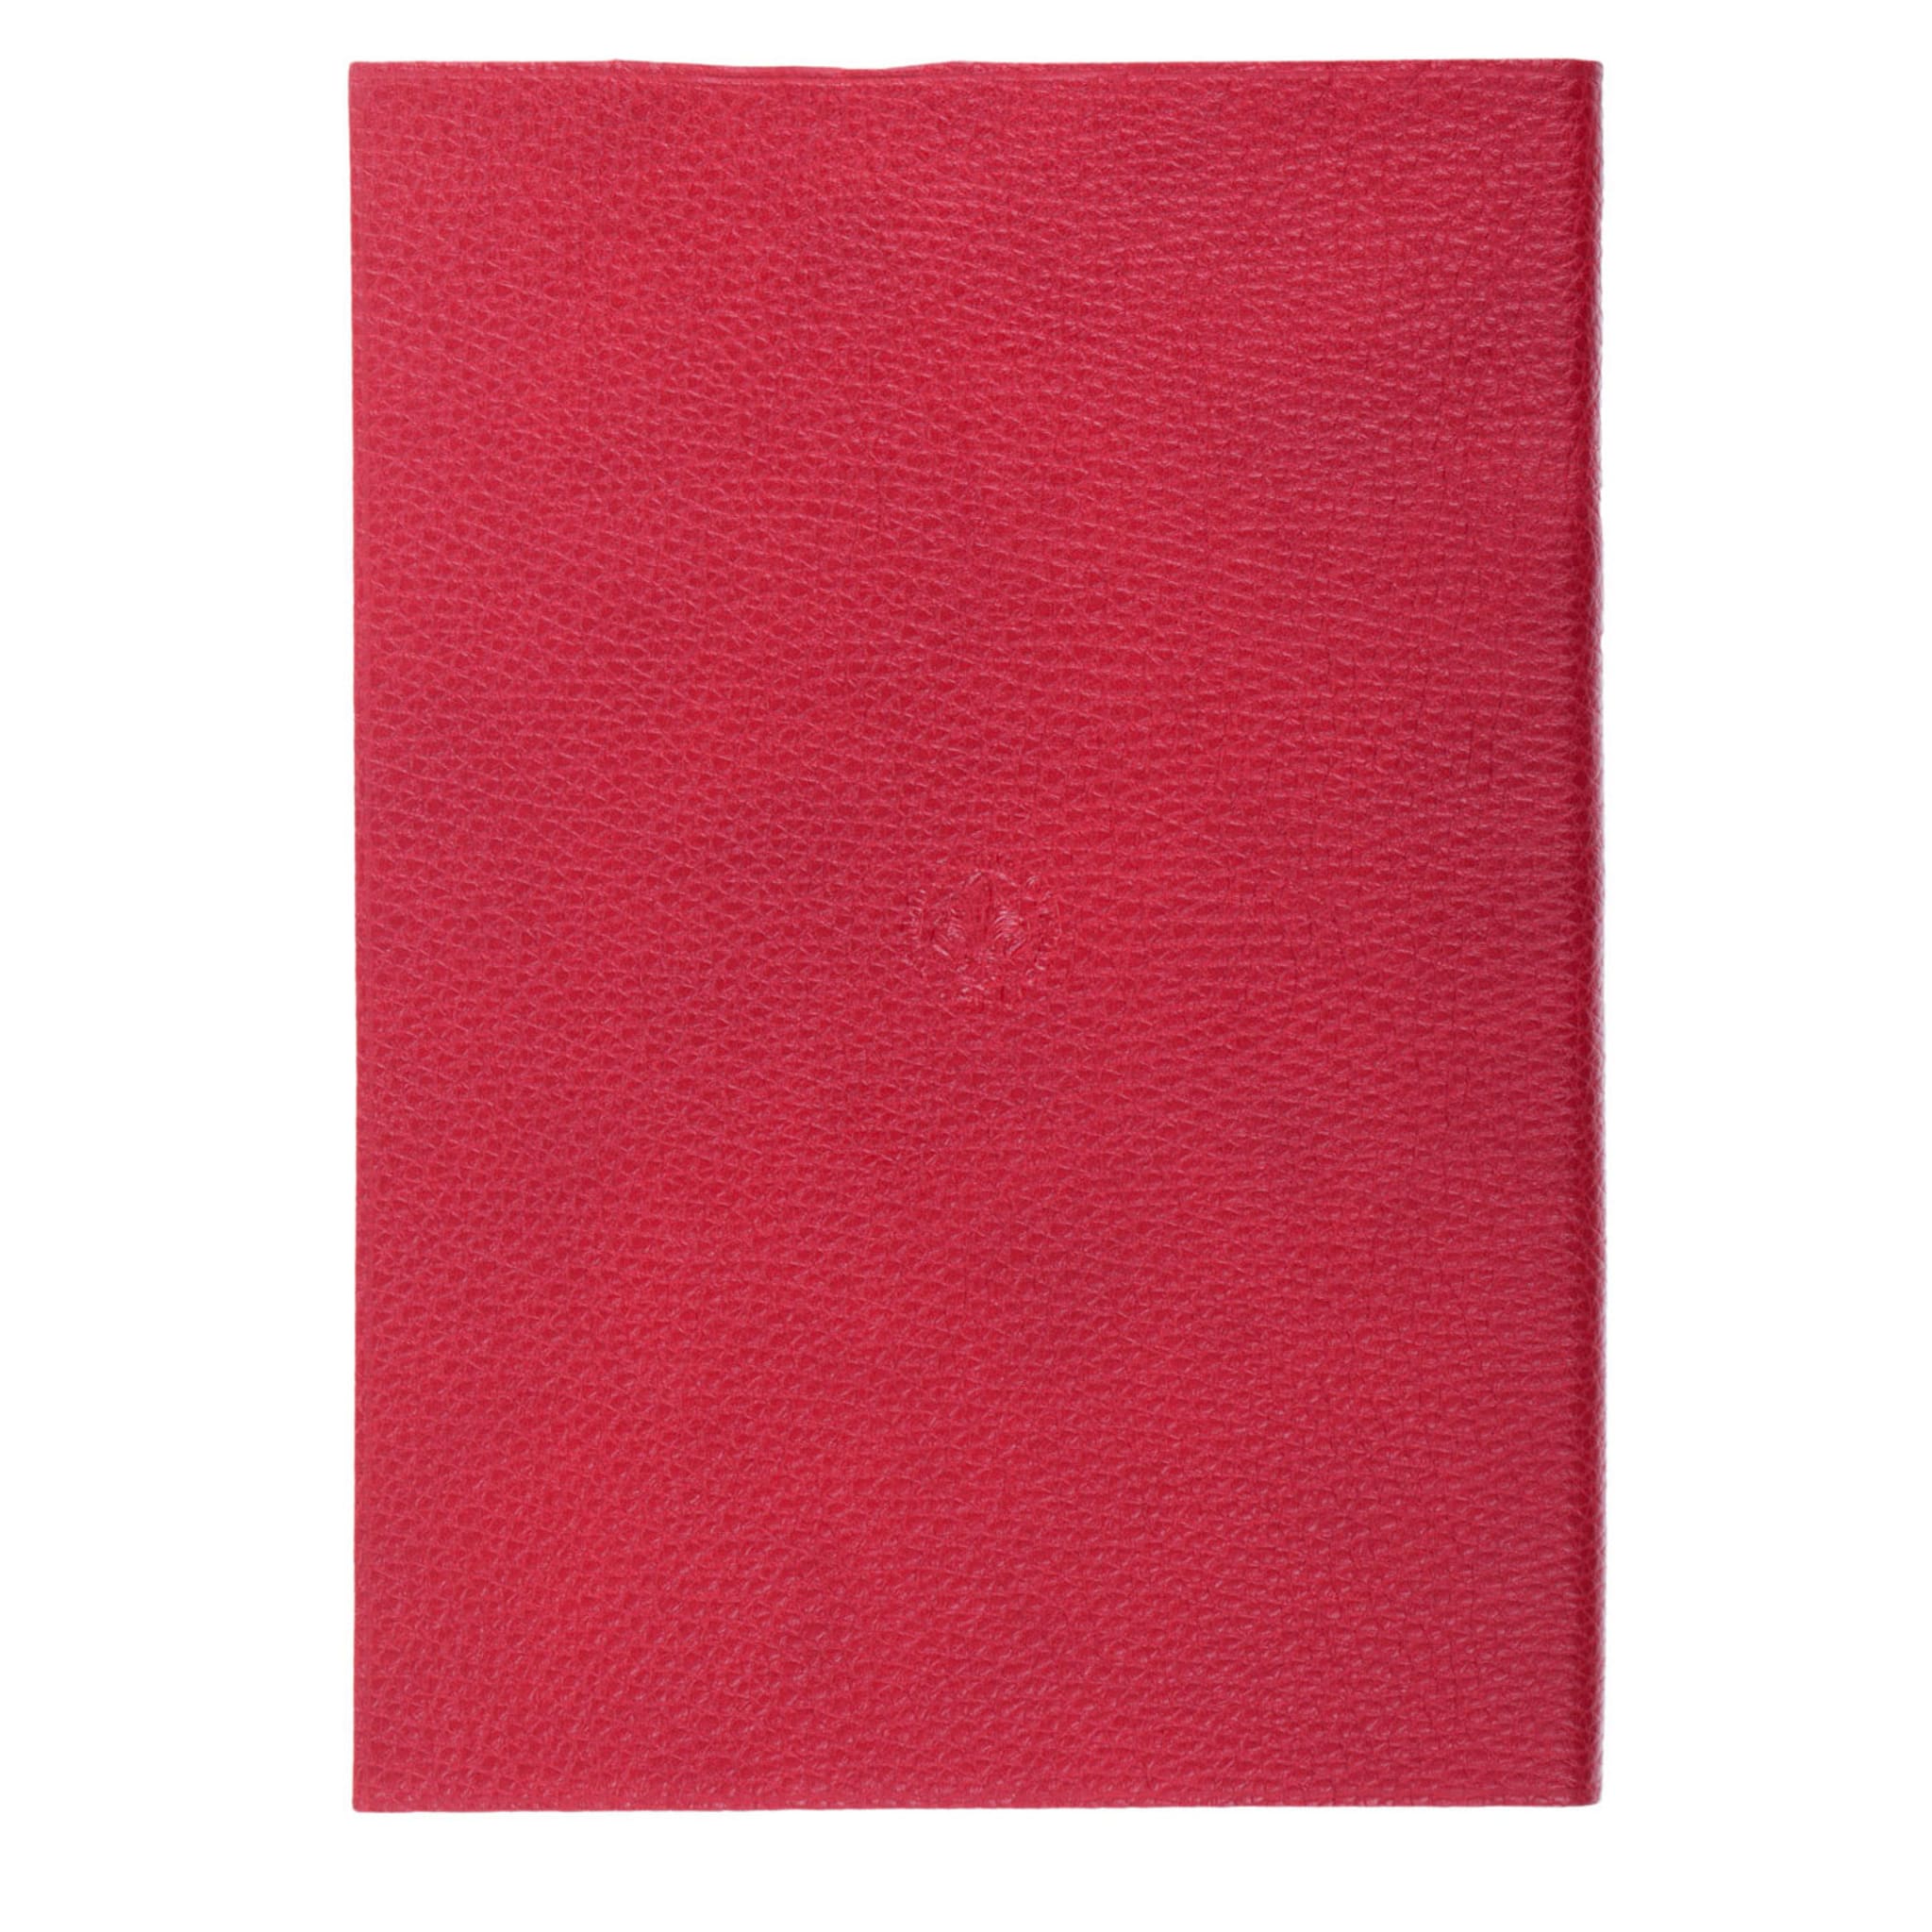 Gold Lily Red Leather Notebook - Alternative view 3